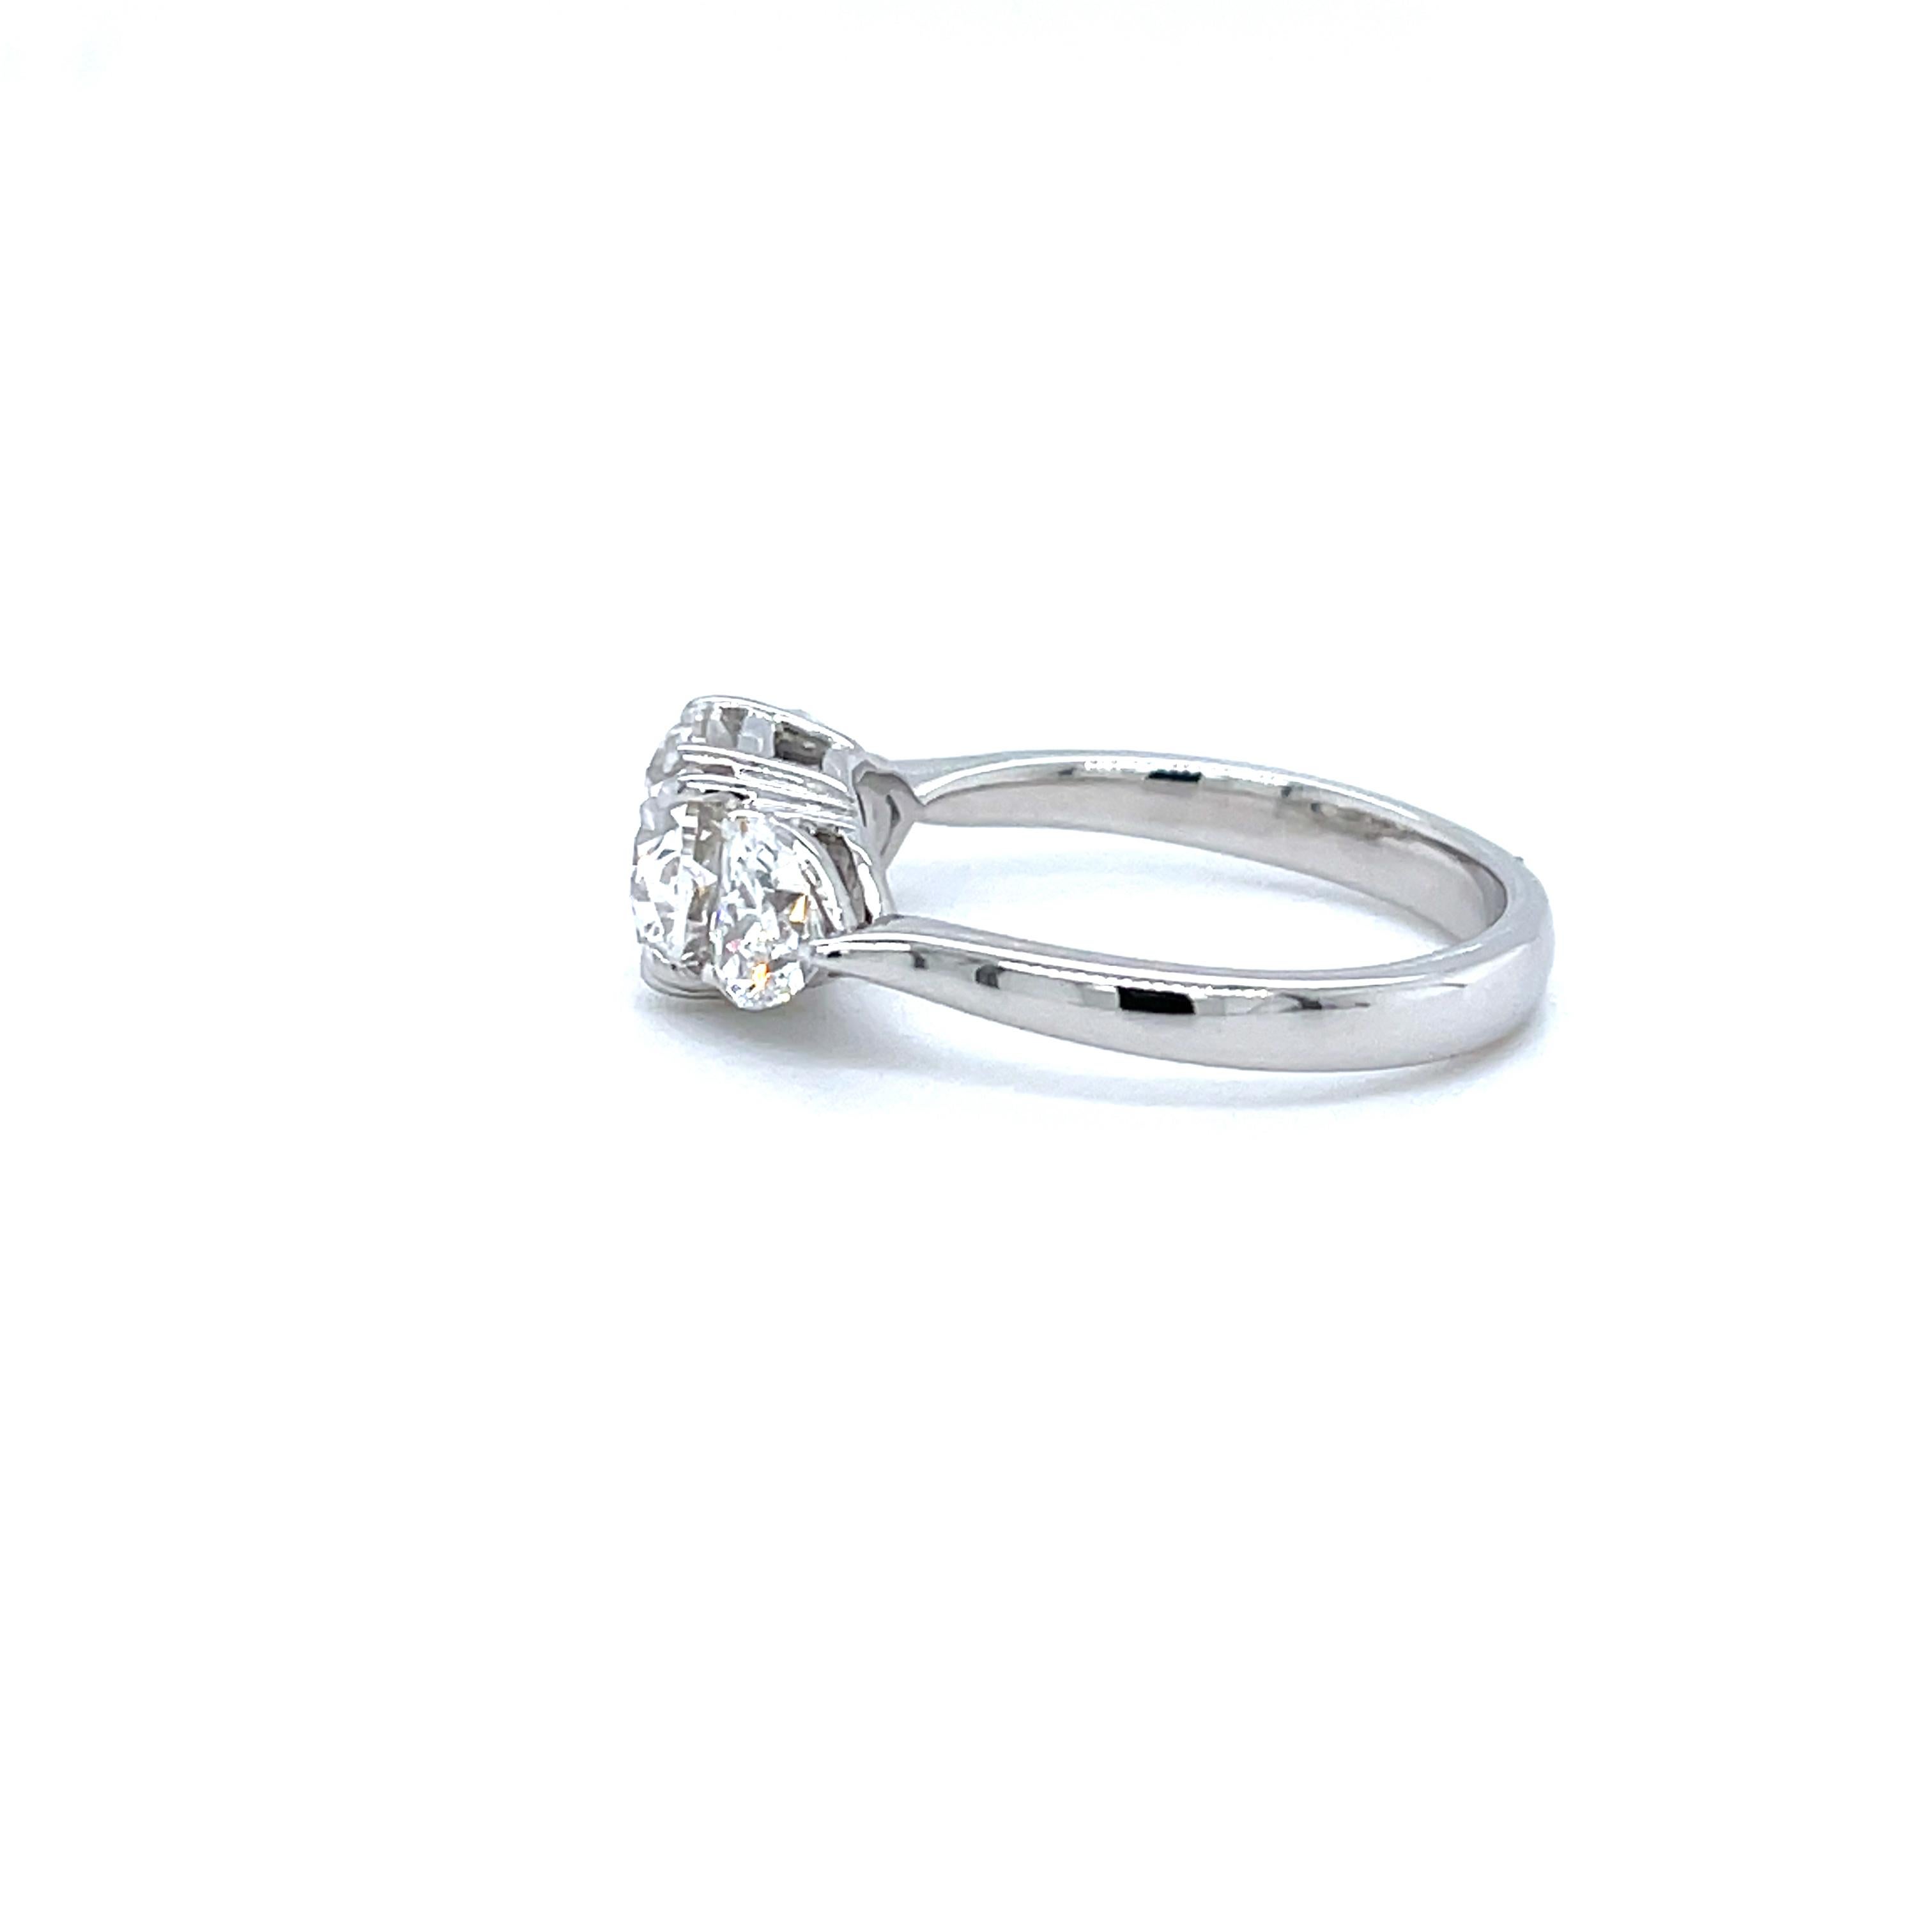 Sparkle with Timeless Elegance: GIA Certified 2.02ct Oval Diamond Ring

Radiate sophistication with this stunning diamond ring. The centerpiece is a captivating 2.02 carat, oval cut diamond boasting a clarity grade of VS1 and a color grade of F,